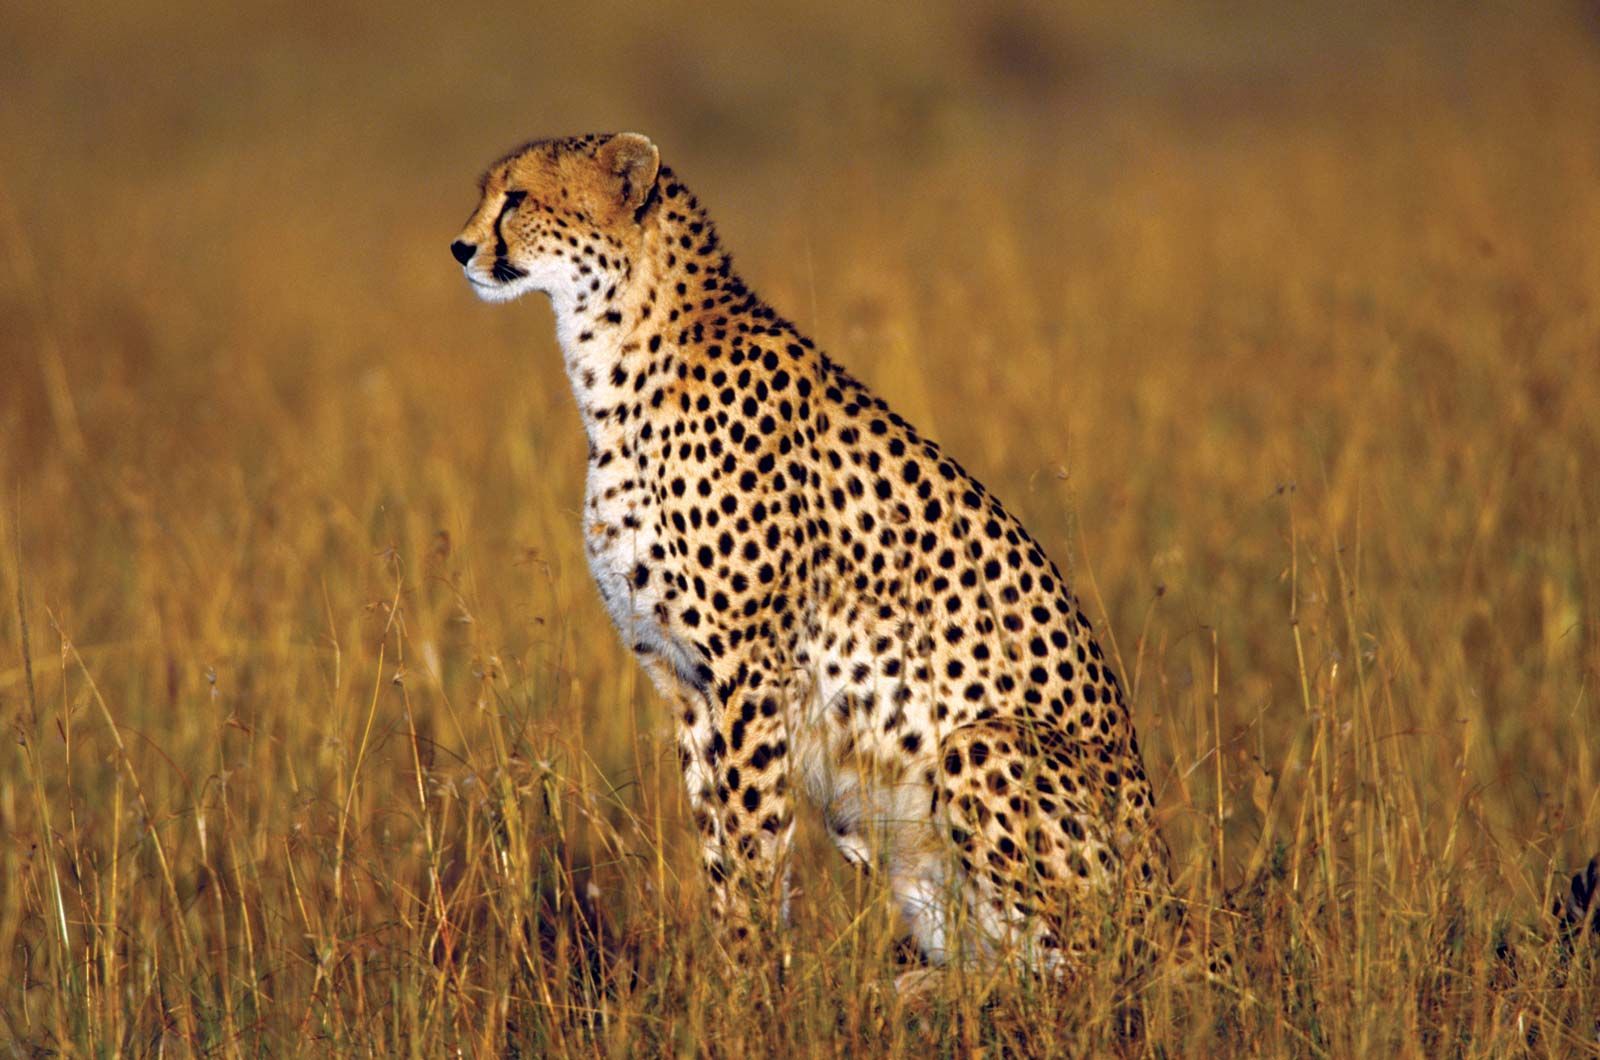 India set to become home for cheetahs after 7 decades